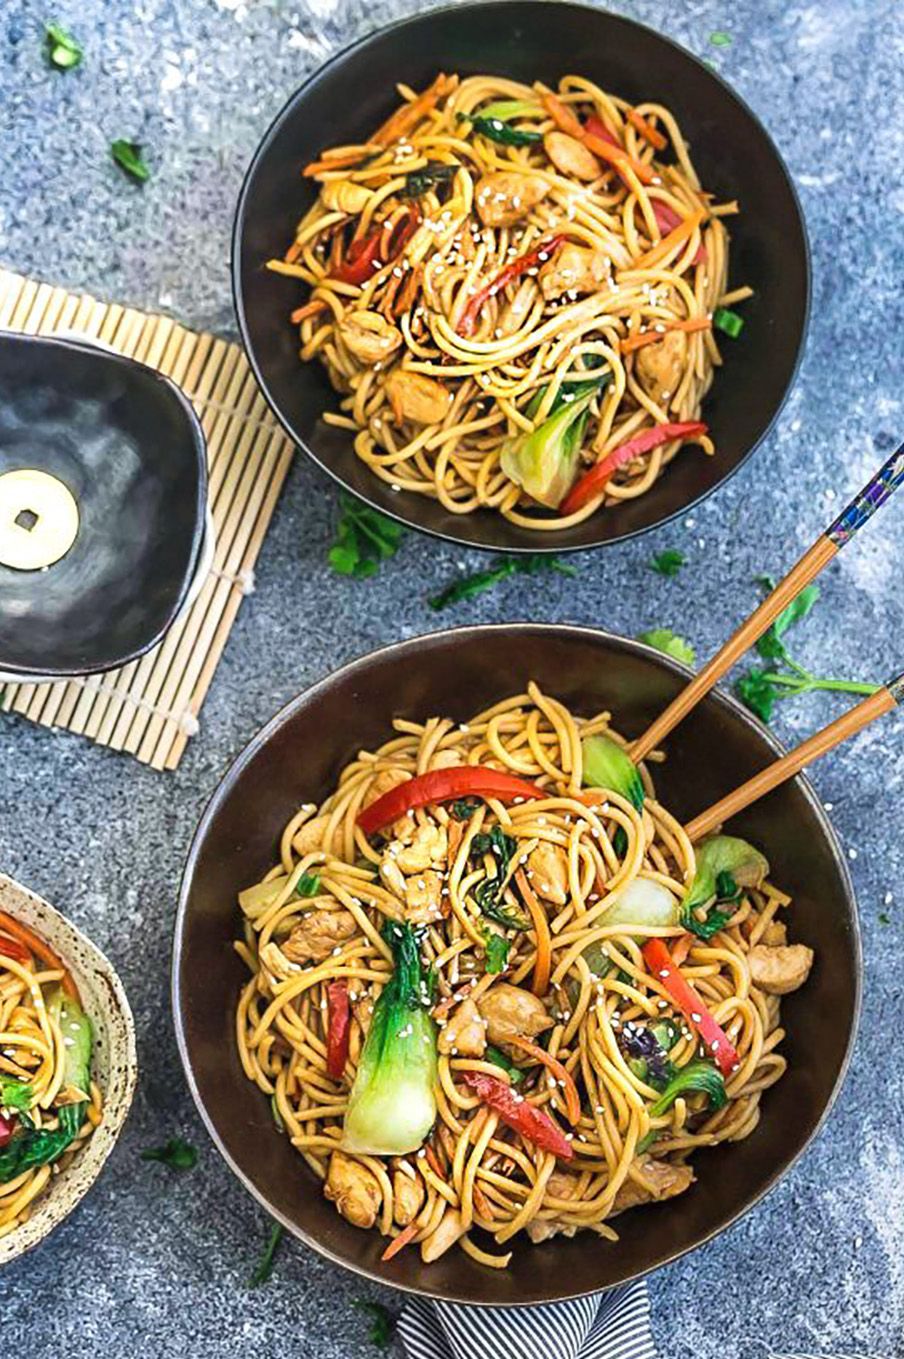 https://hips.hearstapps.com/wdy.h-cdn.co/assets/17/39/1506720640-slow-cooker-chicken-lo-mein-noodles-meal-prep-bowls-lifemadesweeter4-e1487425121984.jpg?crop=0.905xw:0.906xh;0.0748xw,0.00114xh&resize=980:*